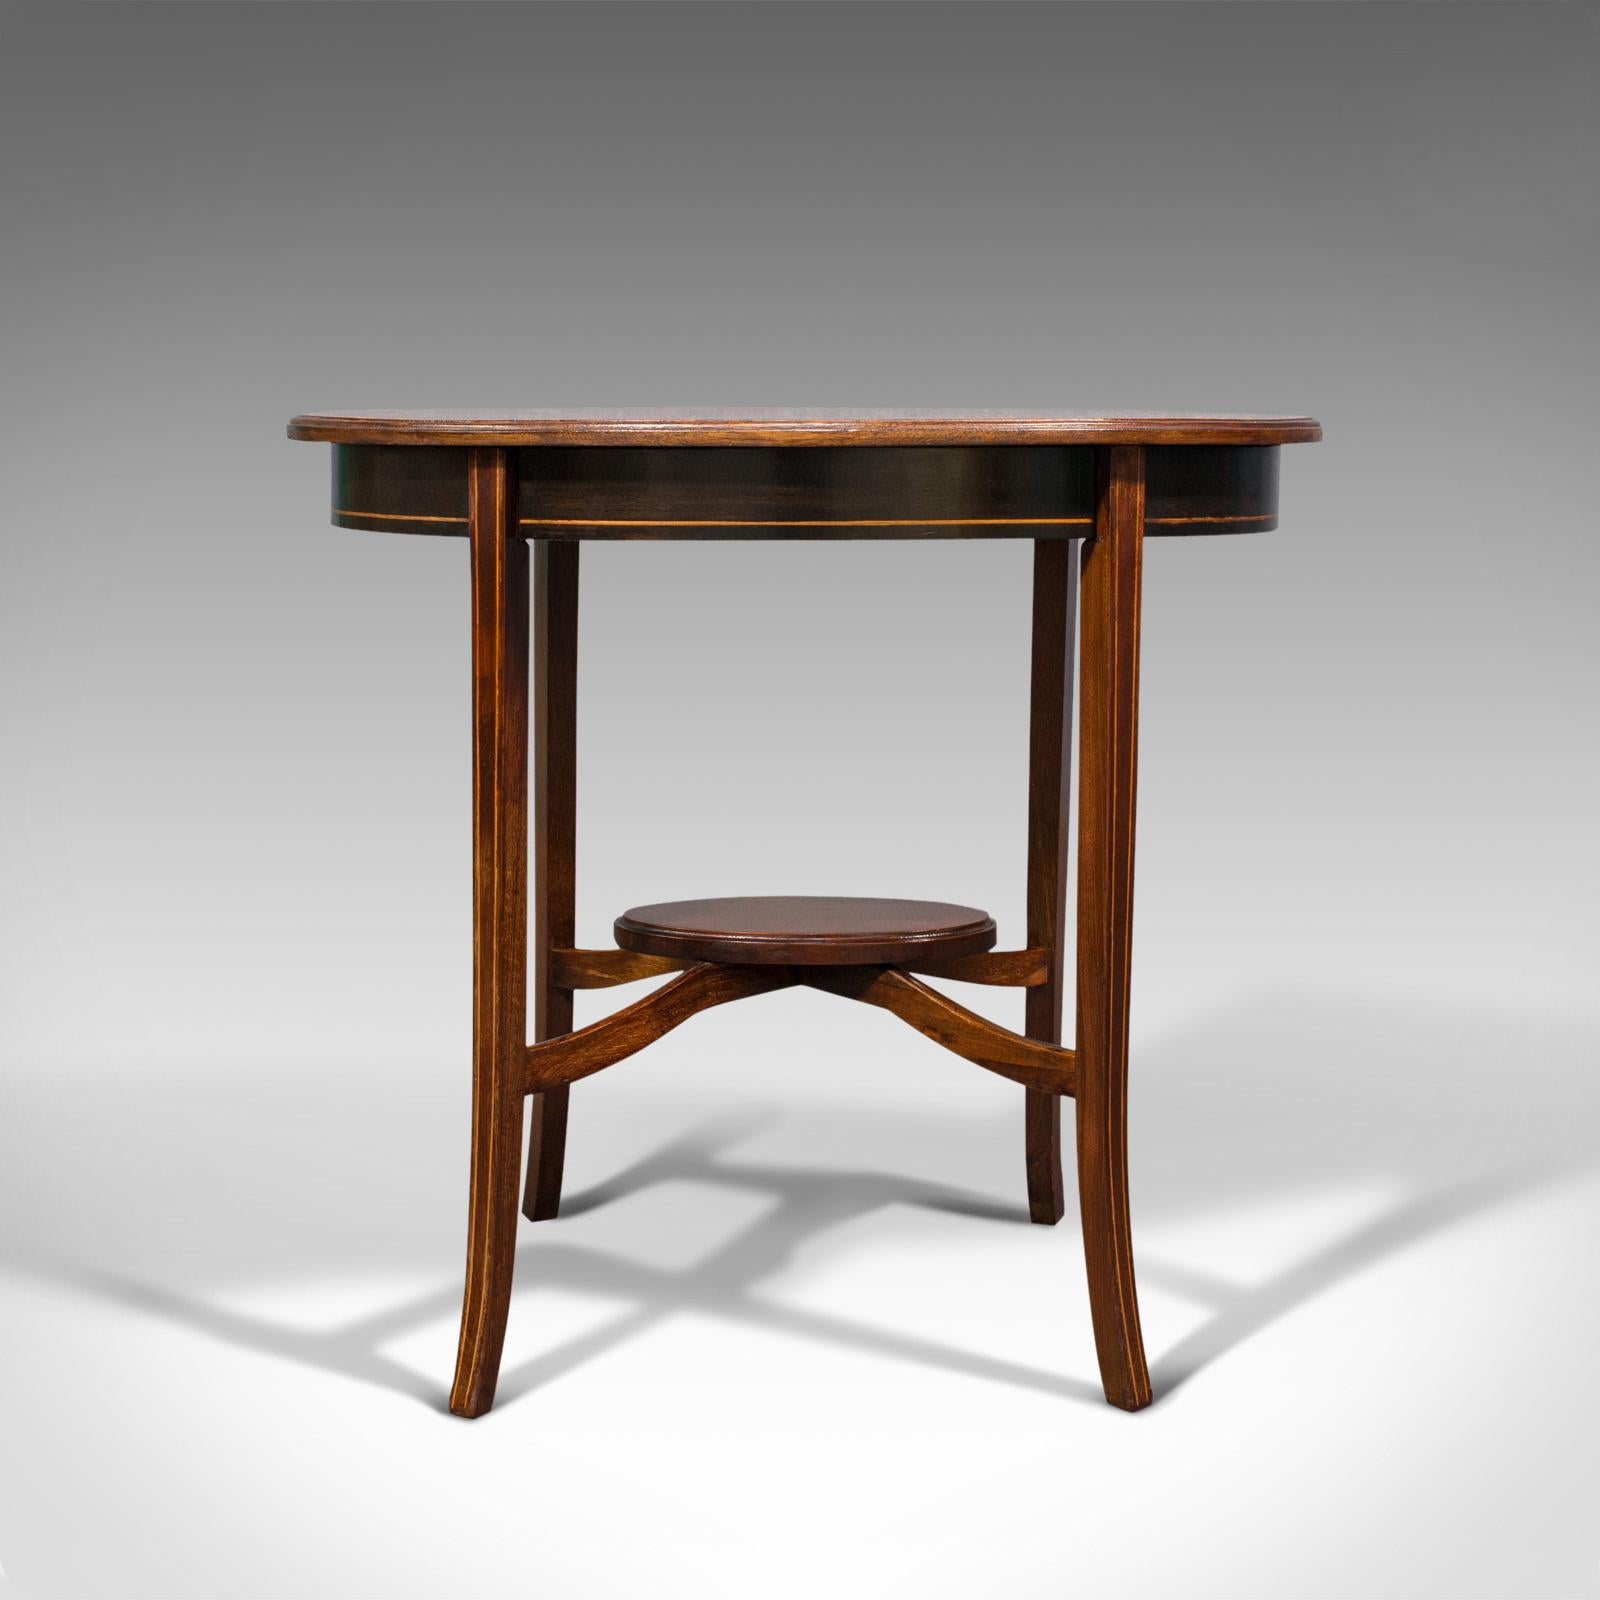 This is an antique side table. An English, mahogany and walnut lamp or occasional table, dating to the Regency period, circa 1820.

Delightfully finished, attractive Regency craftsmanship
Displaying a desirable aged patina and in good